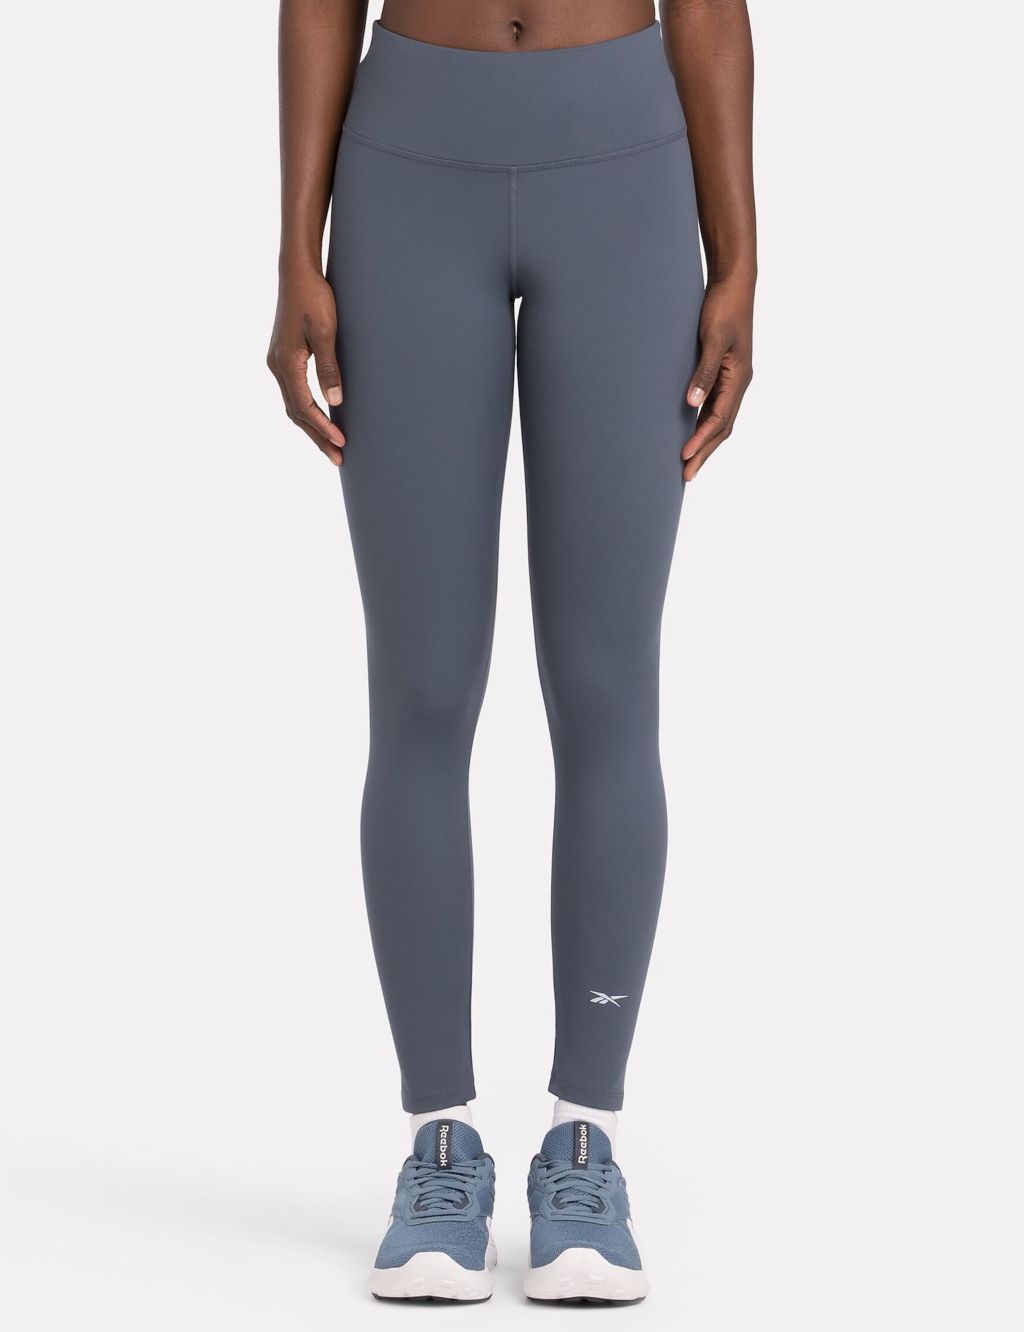 New Arrivals for Men's, Women's and Kid's  Stirling Sports - Wanderlust  Seamless High-Rise 7/8 Tights